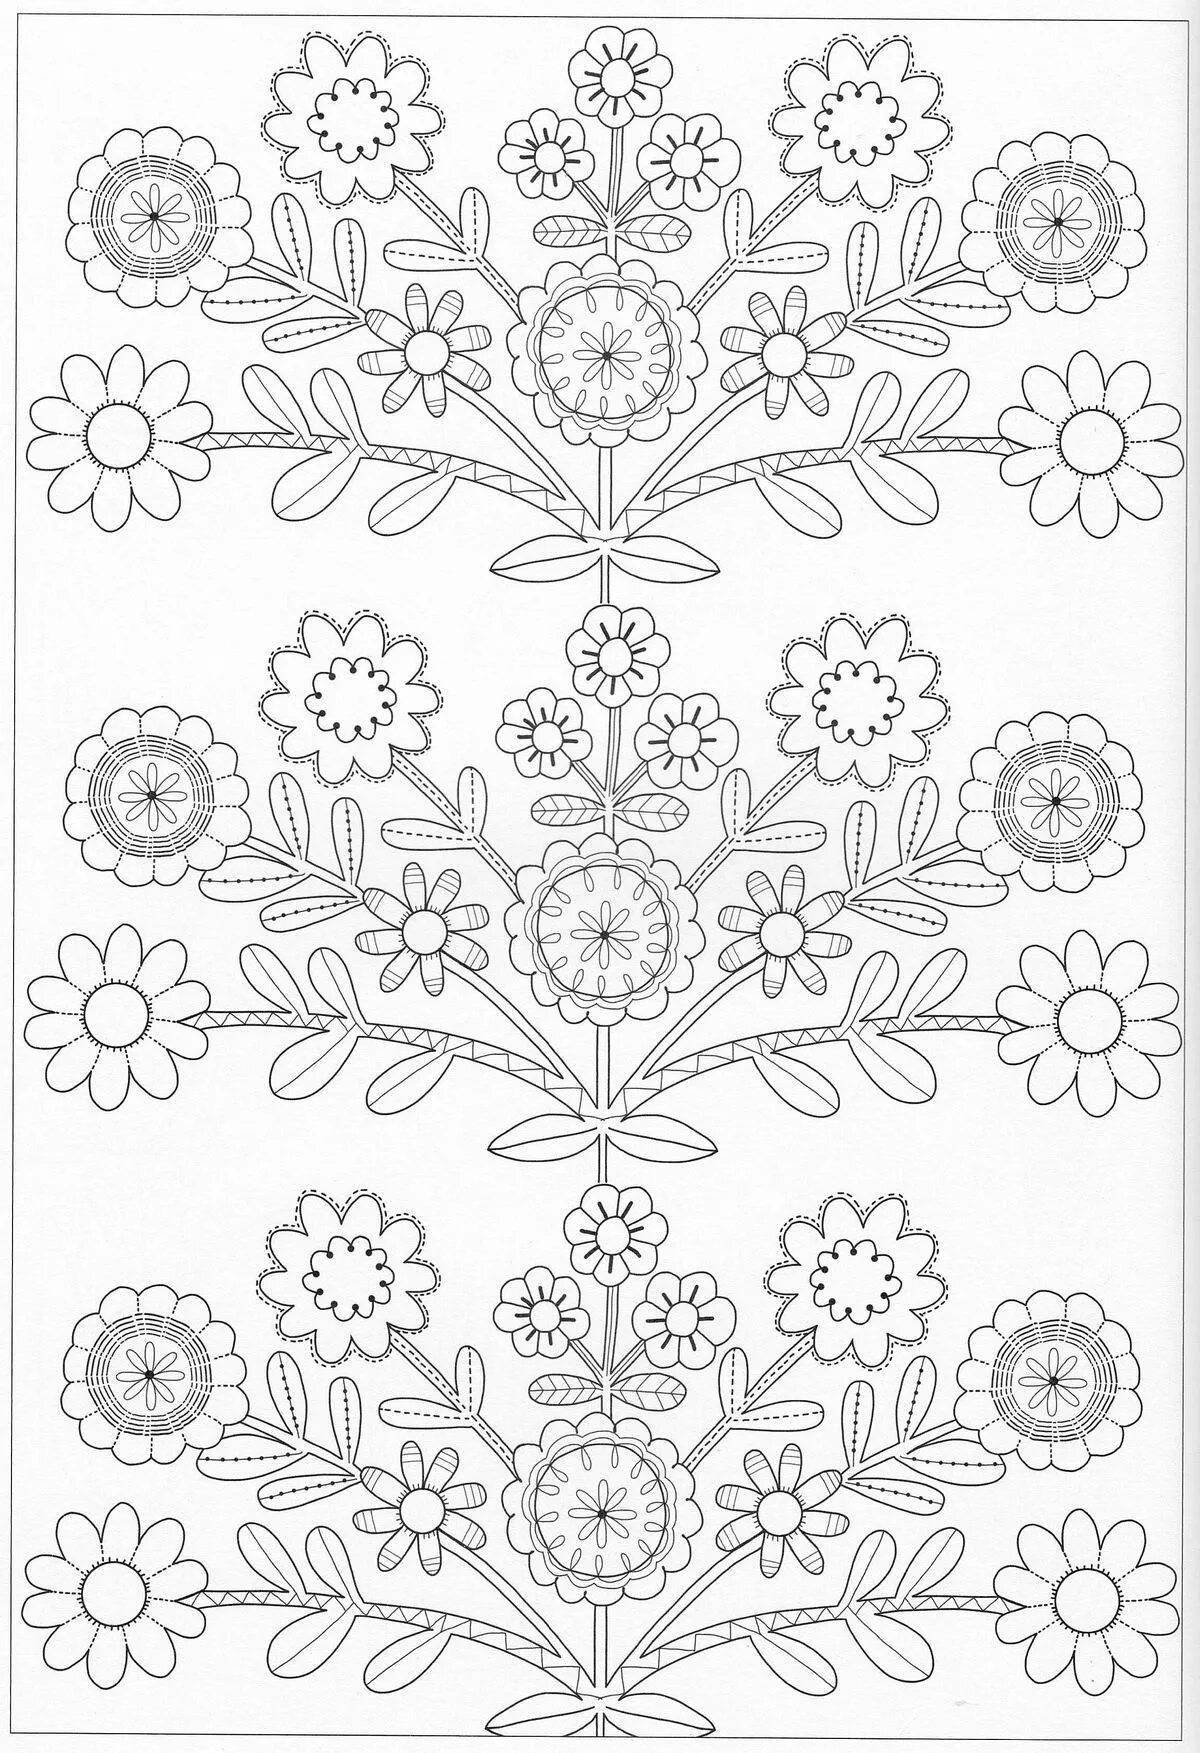 Gorgeous belarusian ornament coloring for kids